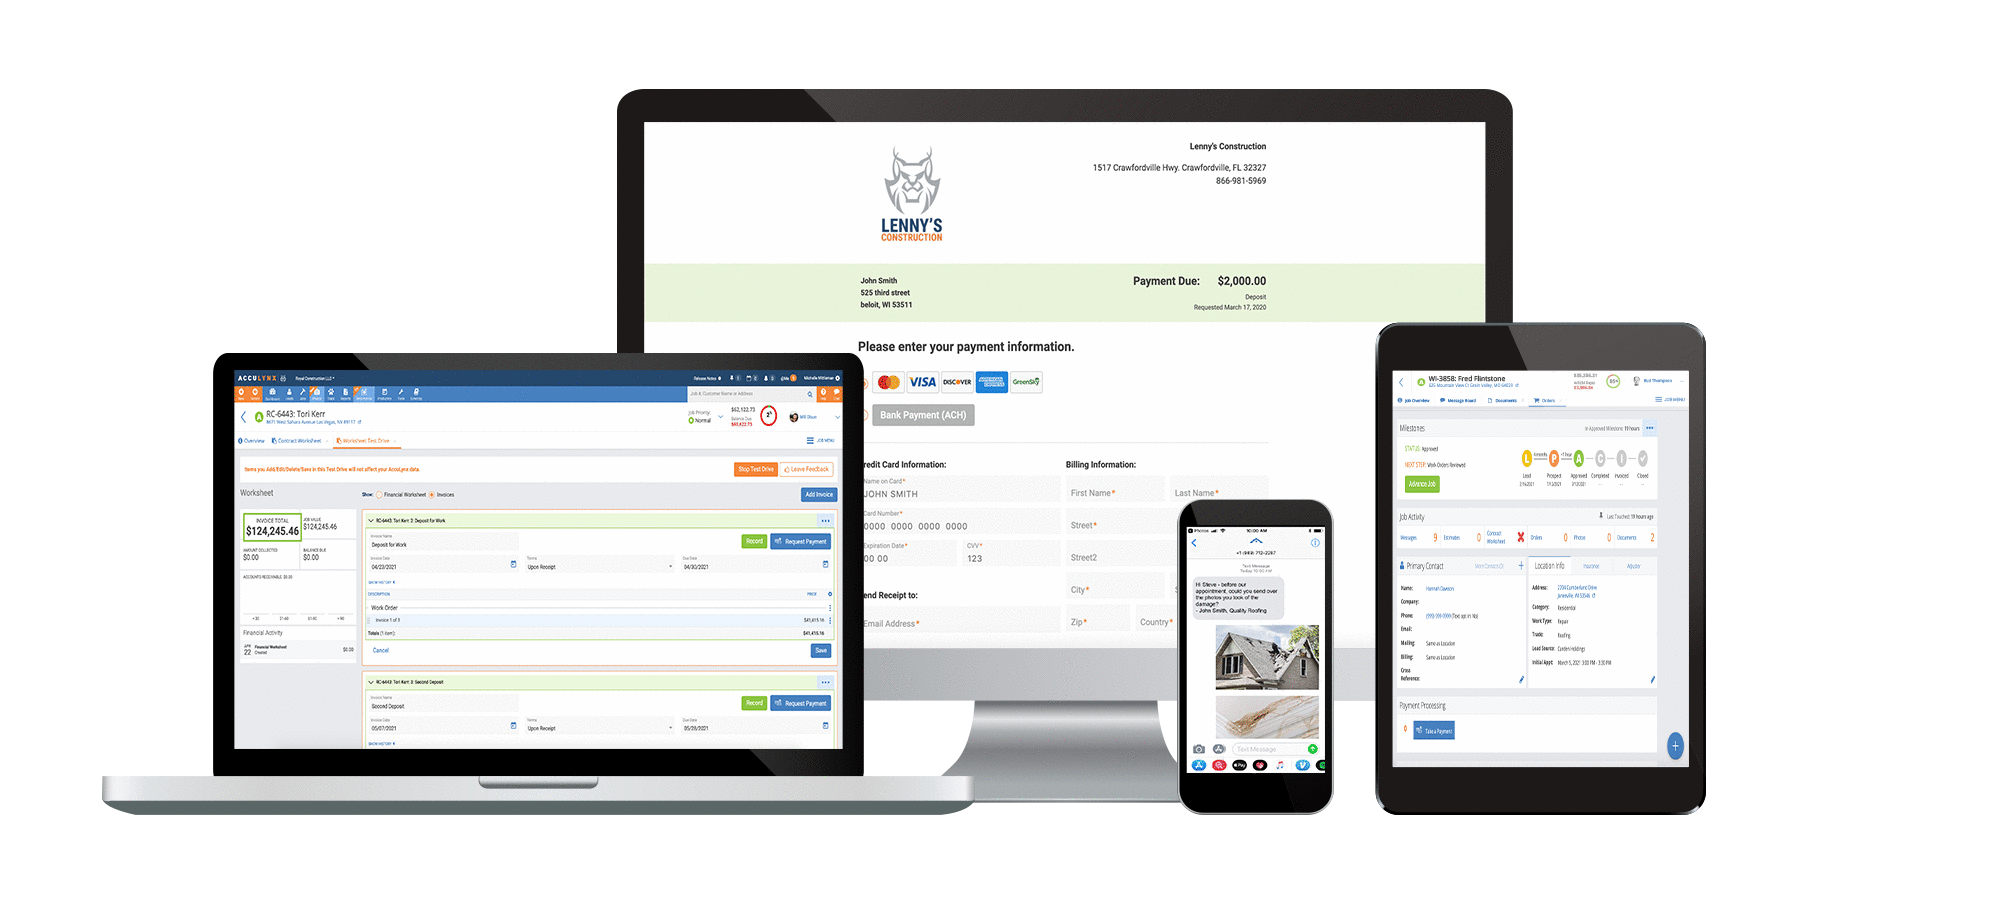 AccuLynx is the all-in-one system that you need to run your roofing company. Track leads, manage jobs, collect payments, provide financing and so much more all within AccuLynx.